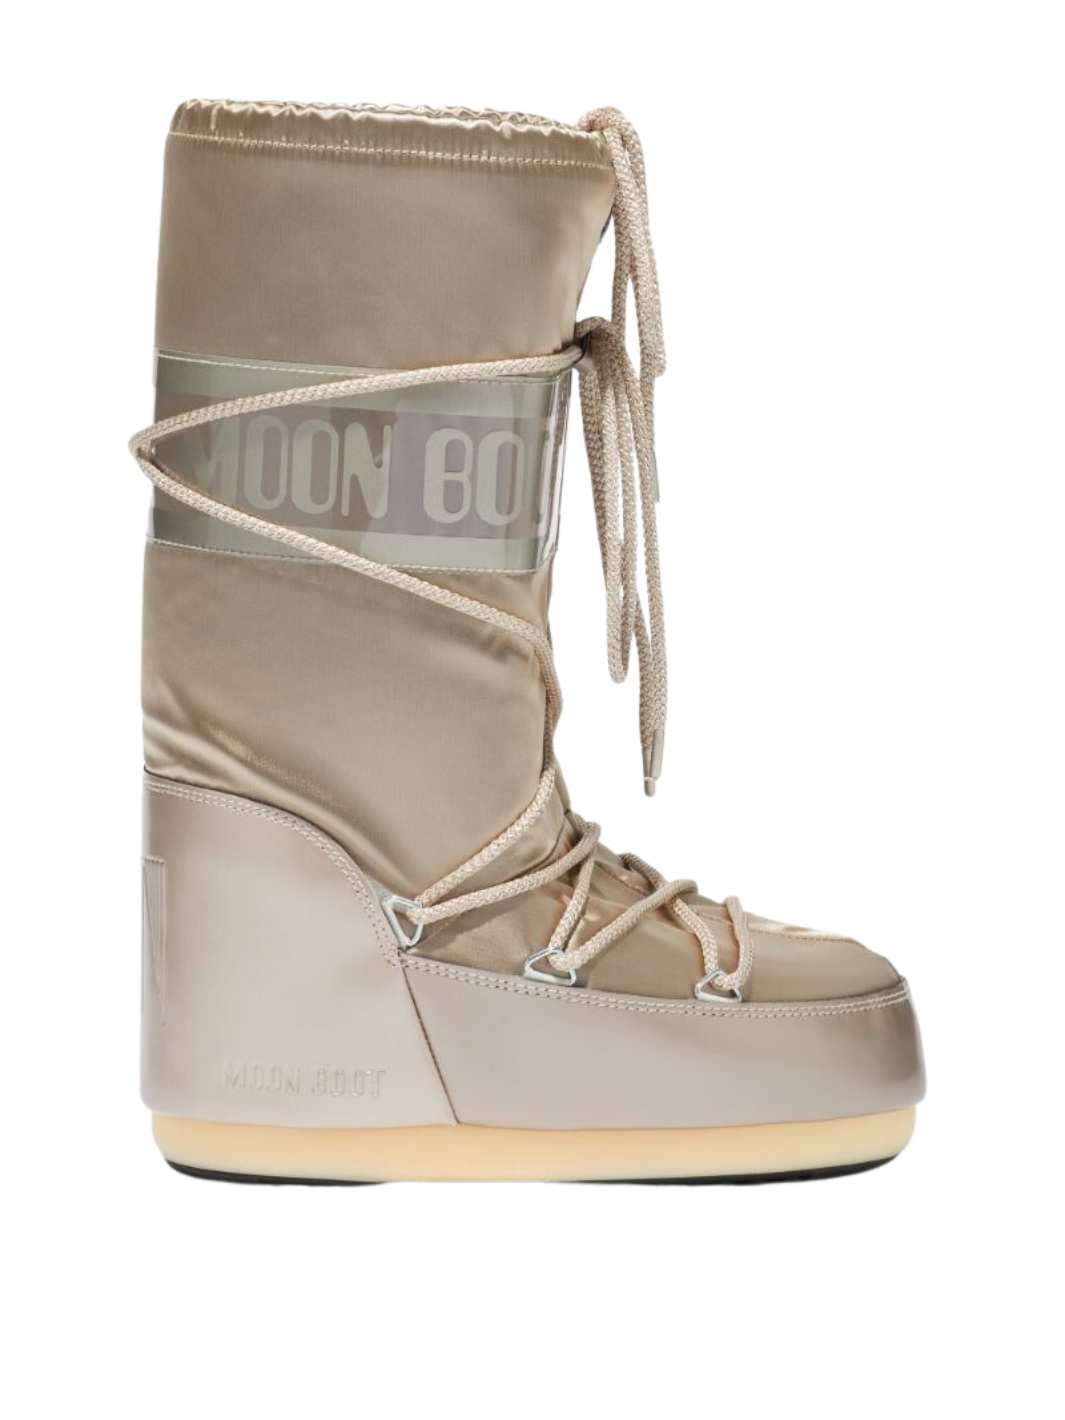 Moon Boot Shoes Boots | MB Icon Glance Platinum Satin